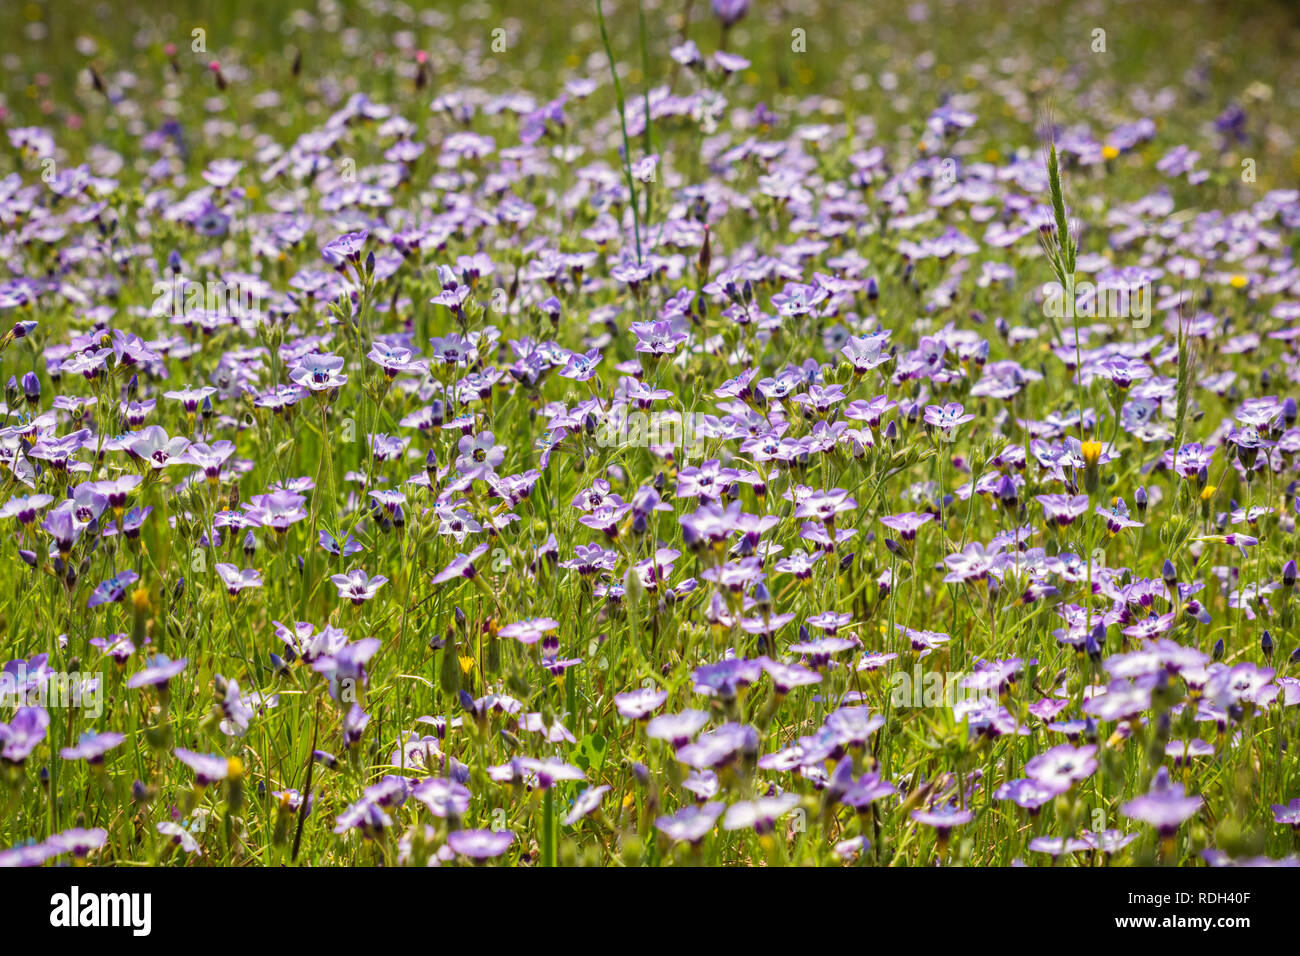 Gilia wildflowers blooming on a meadow, North Table Mountain, Oroville, California Stock Photo